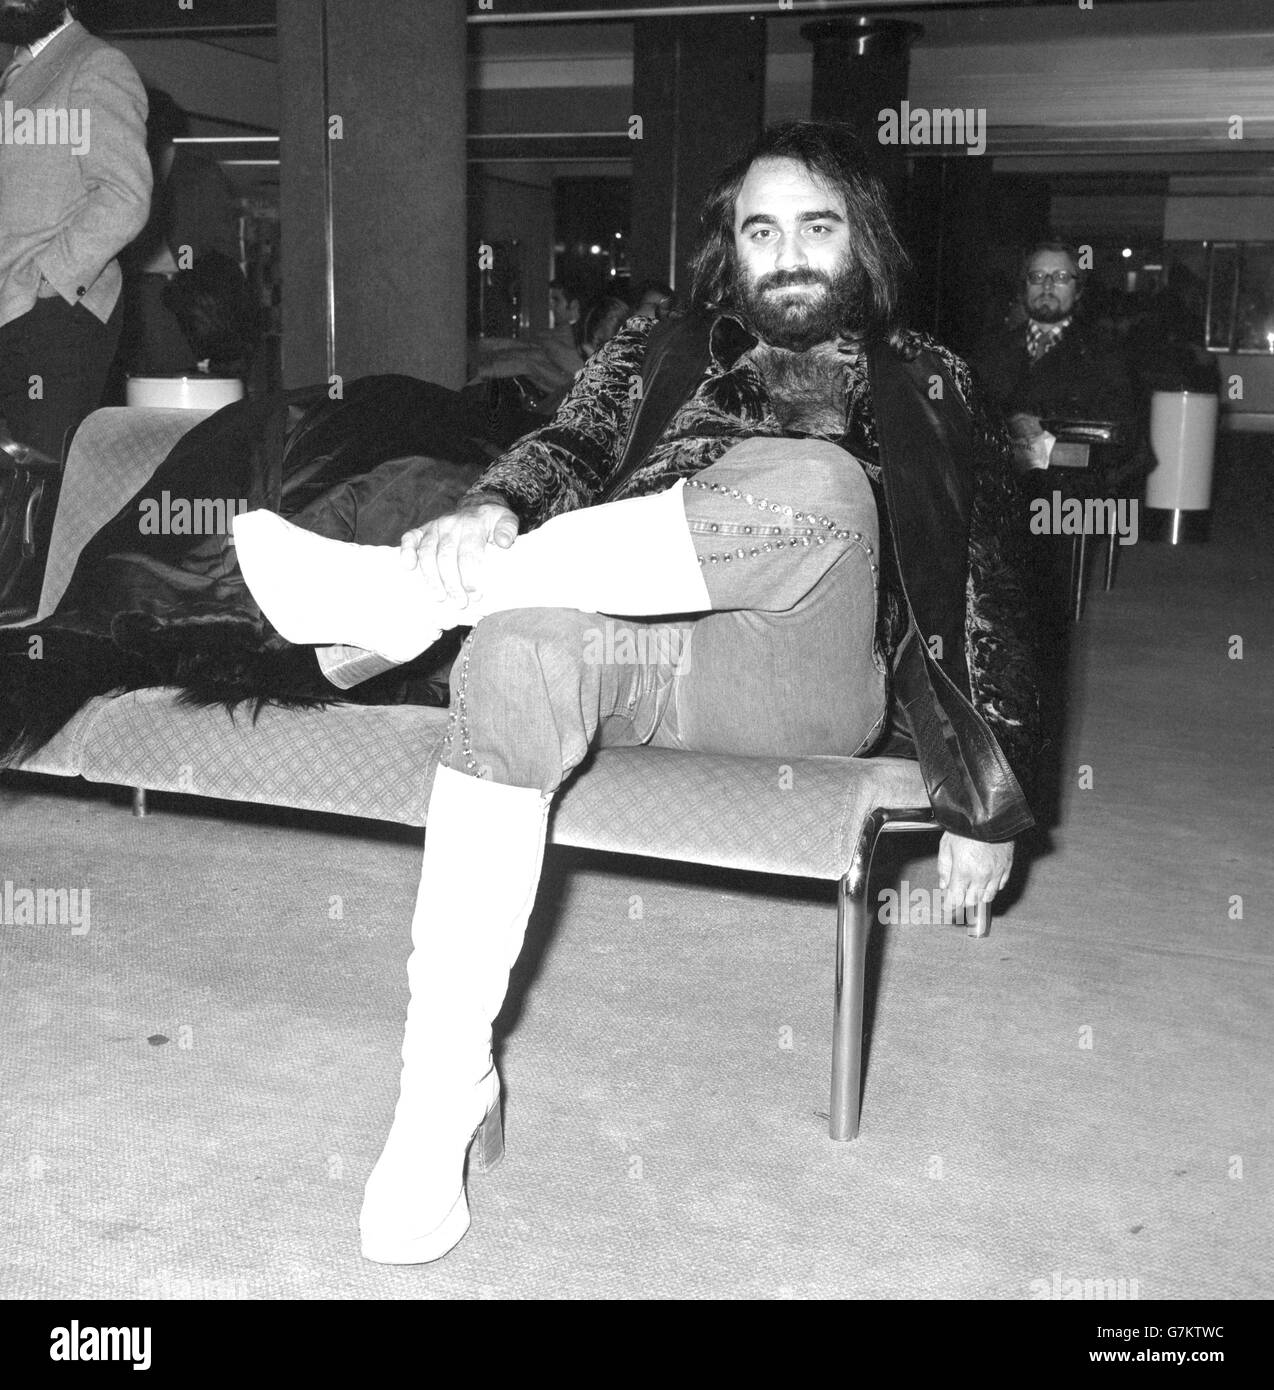 Greek singer Demis Roussos at London's Heathrow Airport, where he was  leaving for a tour of Scandinavia Stock Photo - Alamy